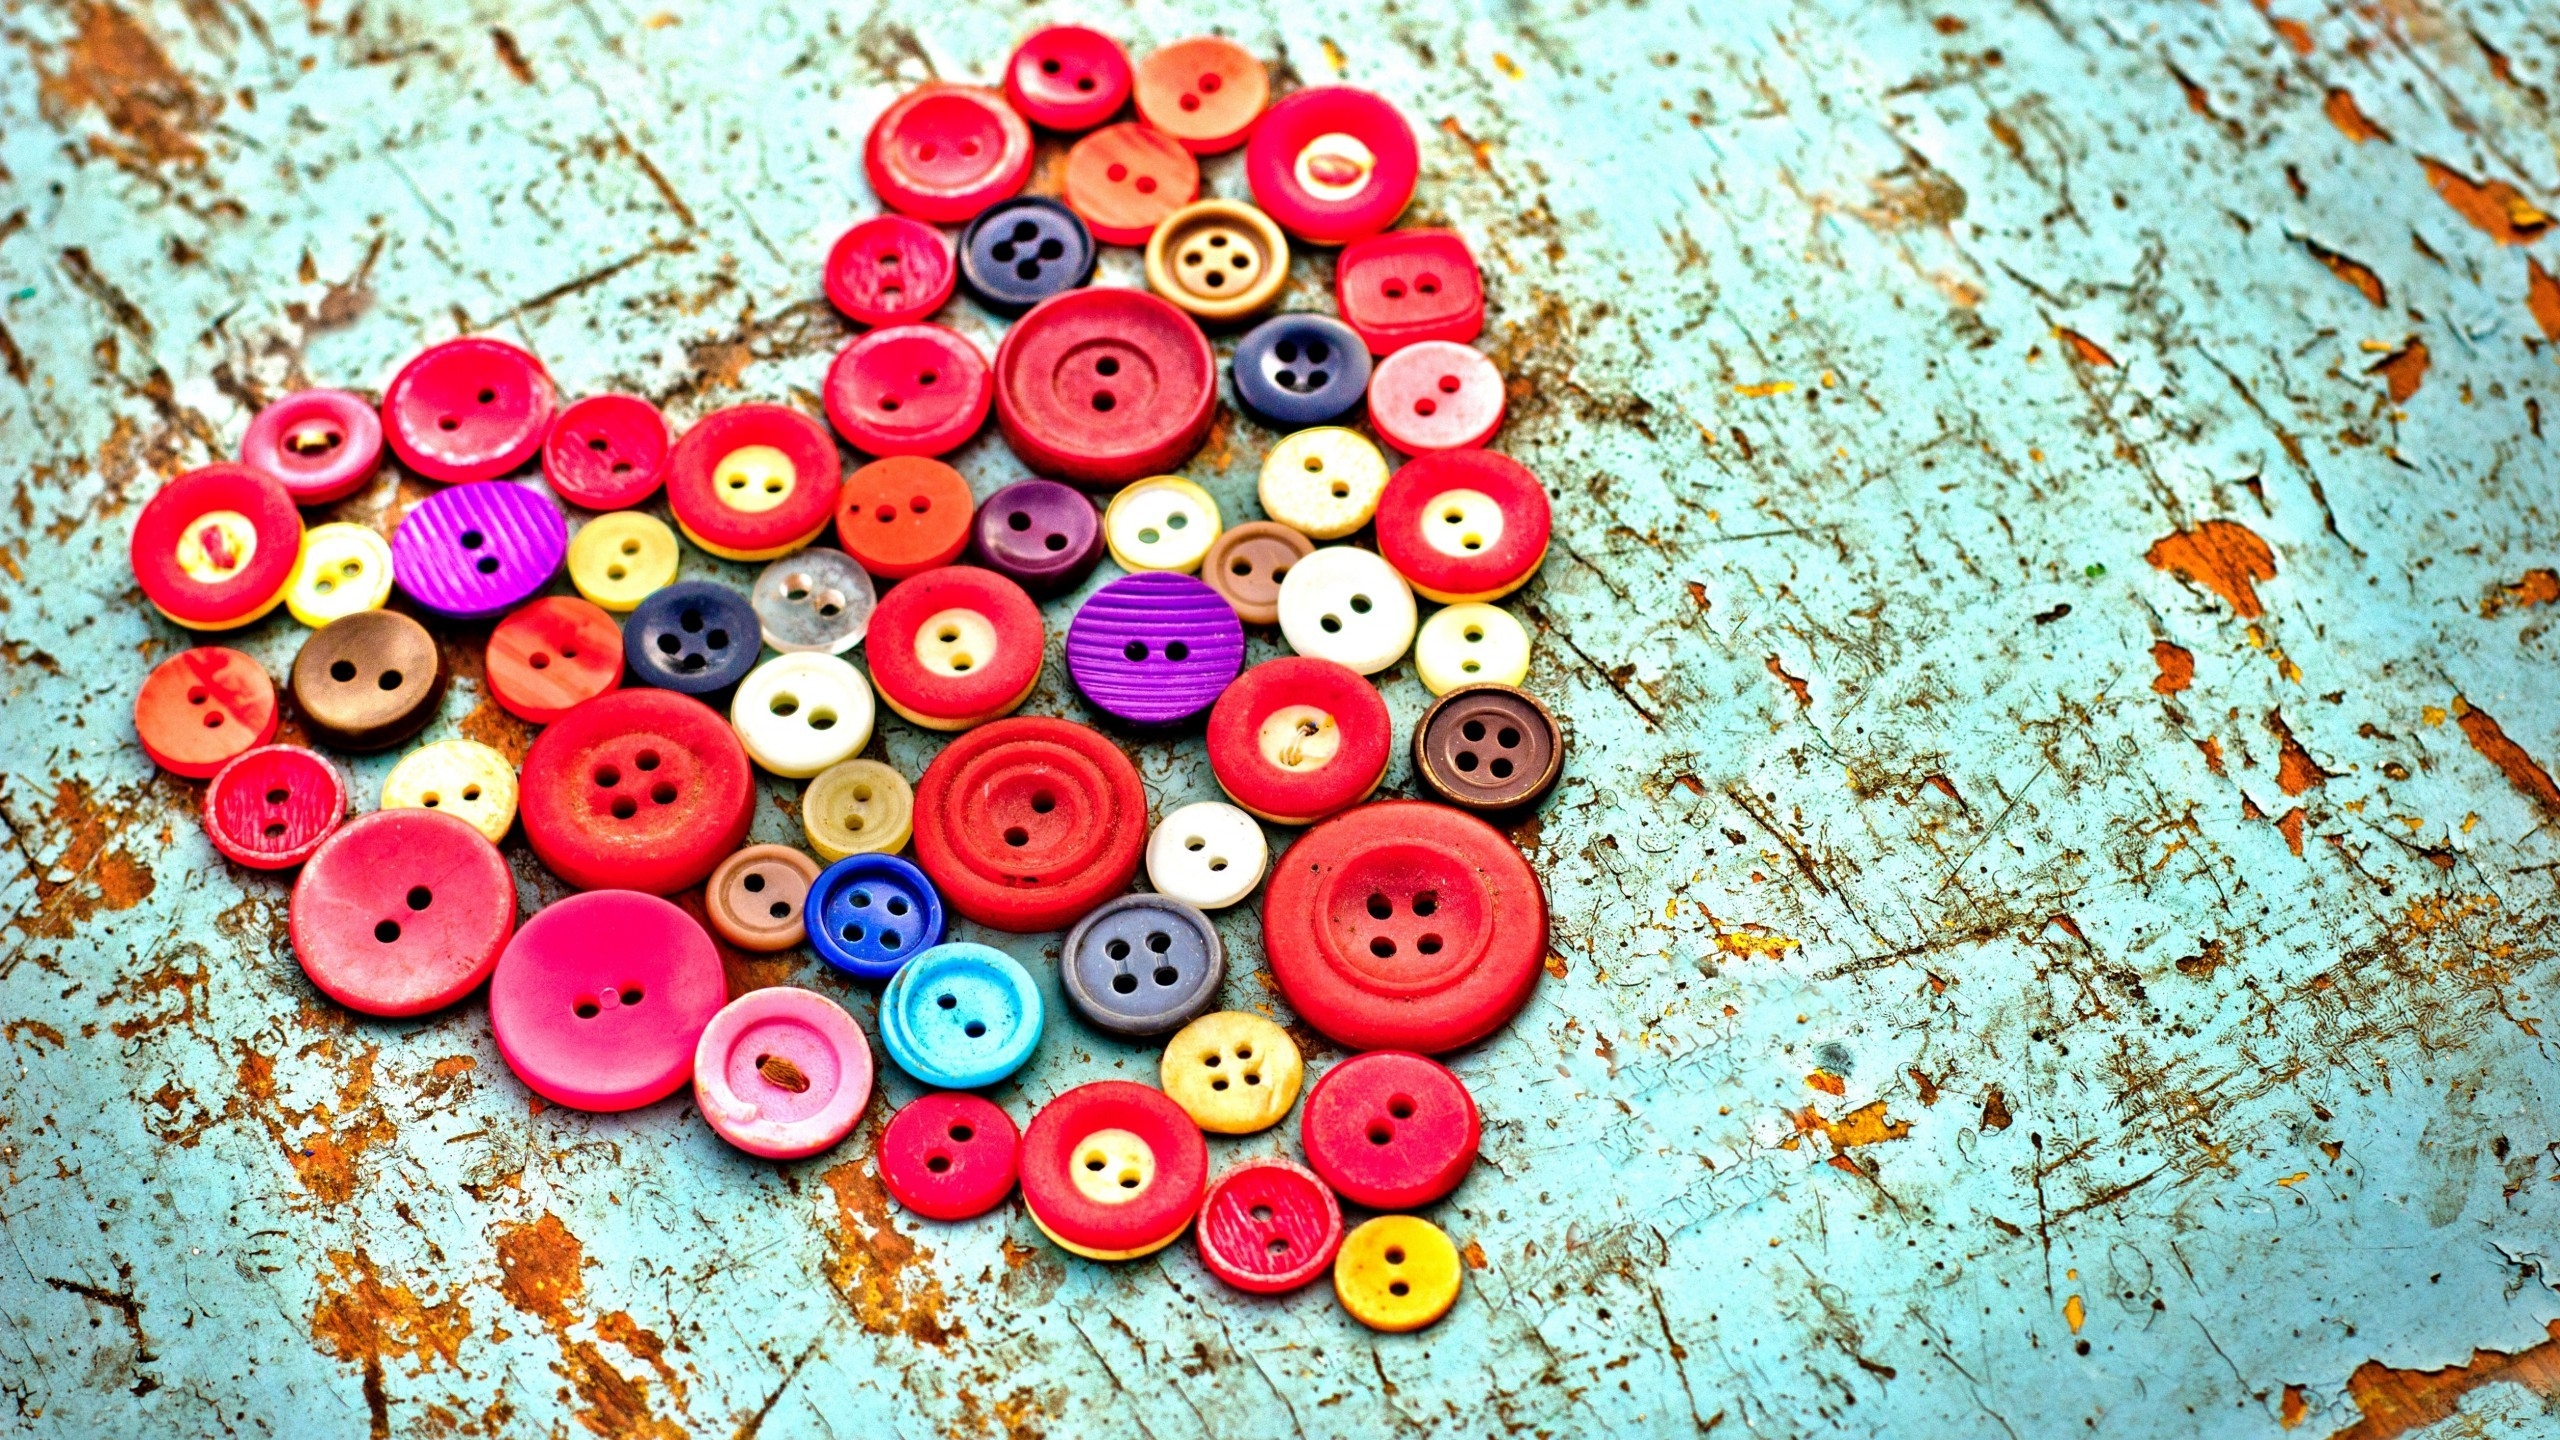 Buttons Heart for 2560x1440 HDTV resolution